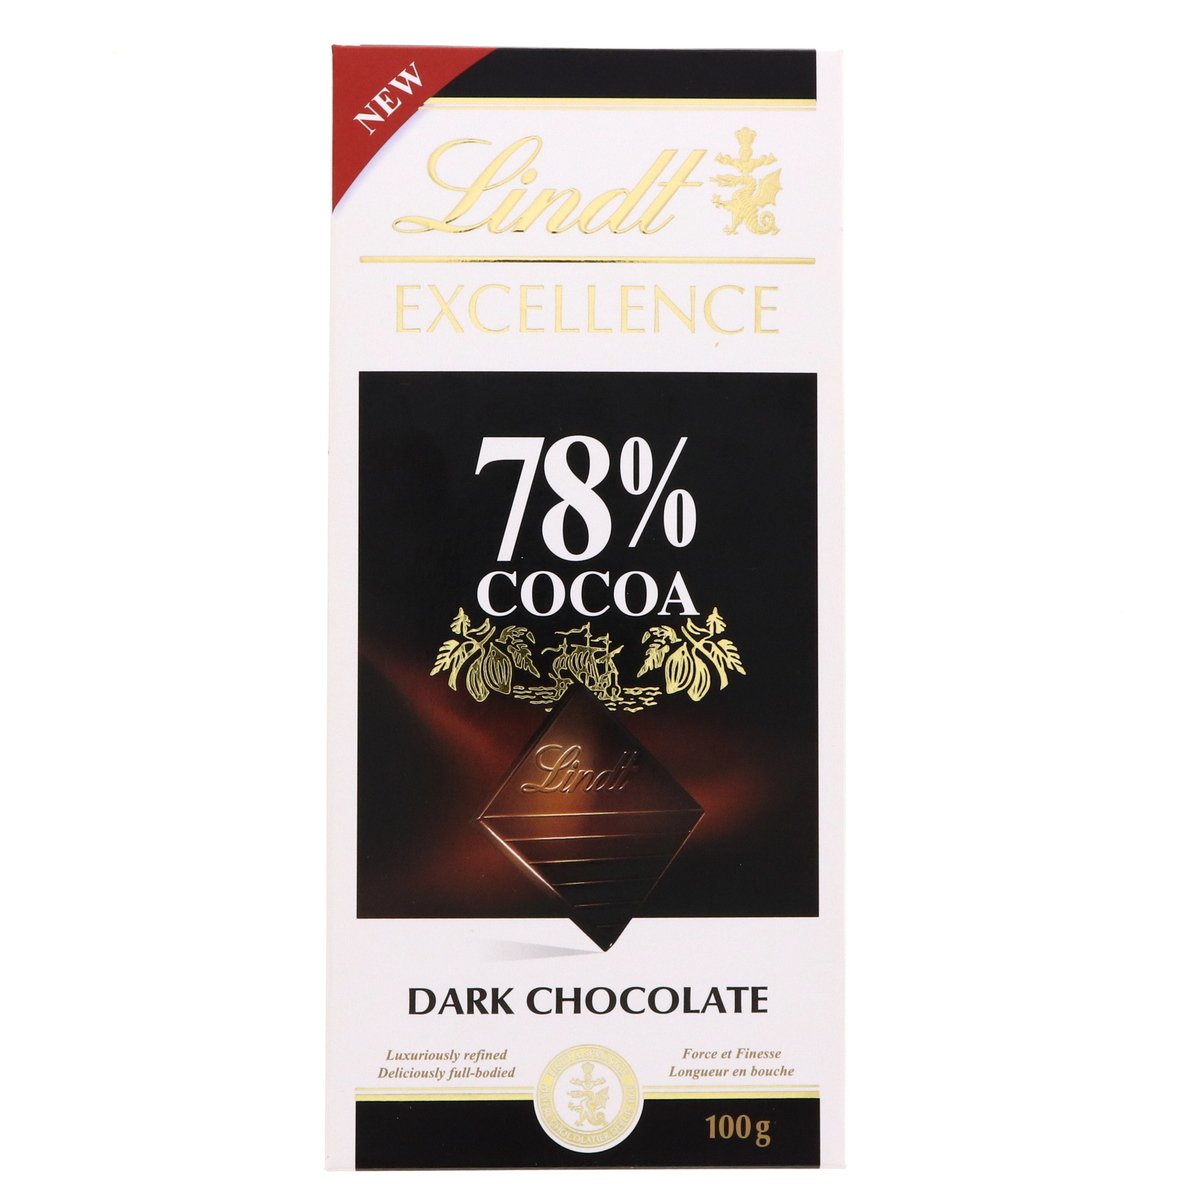 Lindt Excellence 78% Cocoa Dark Chocolate 100 g